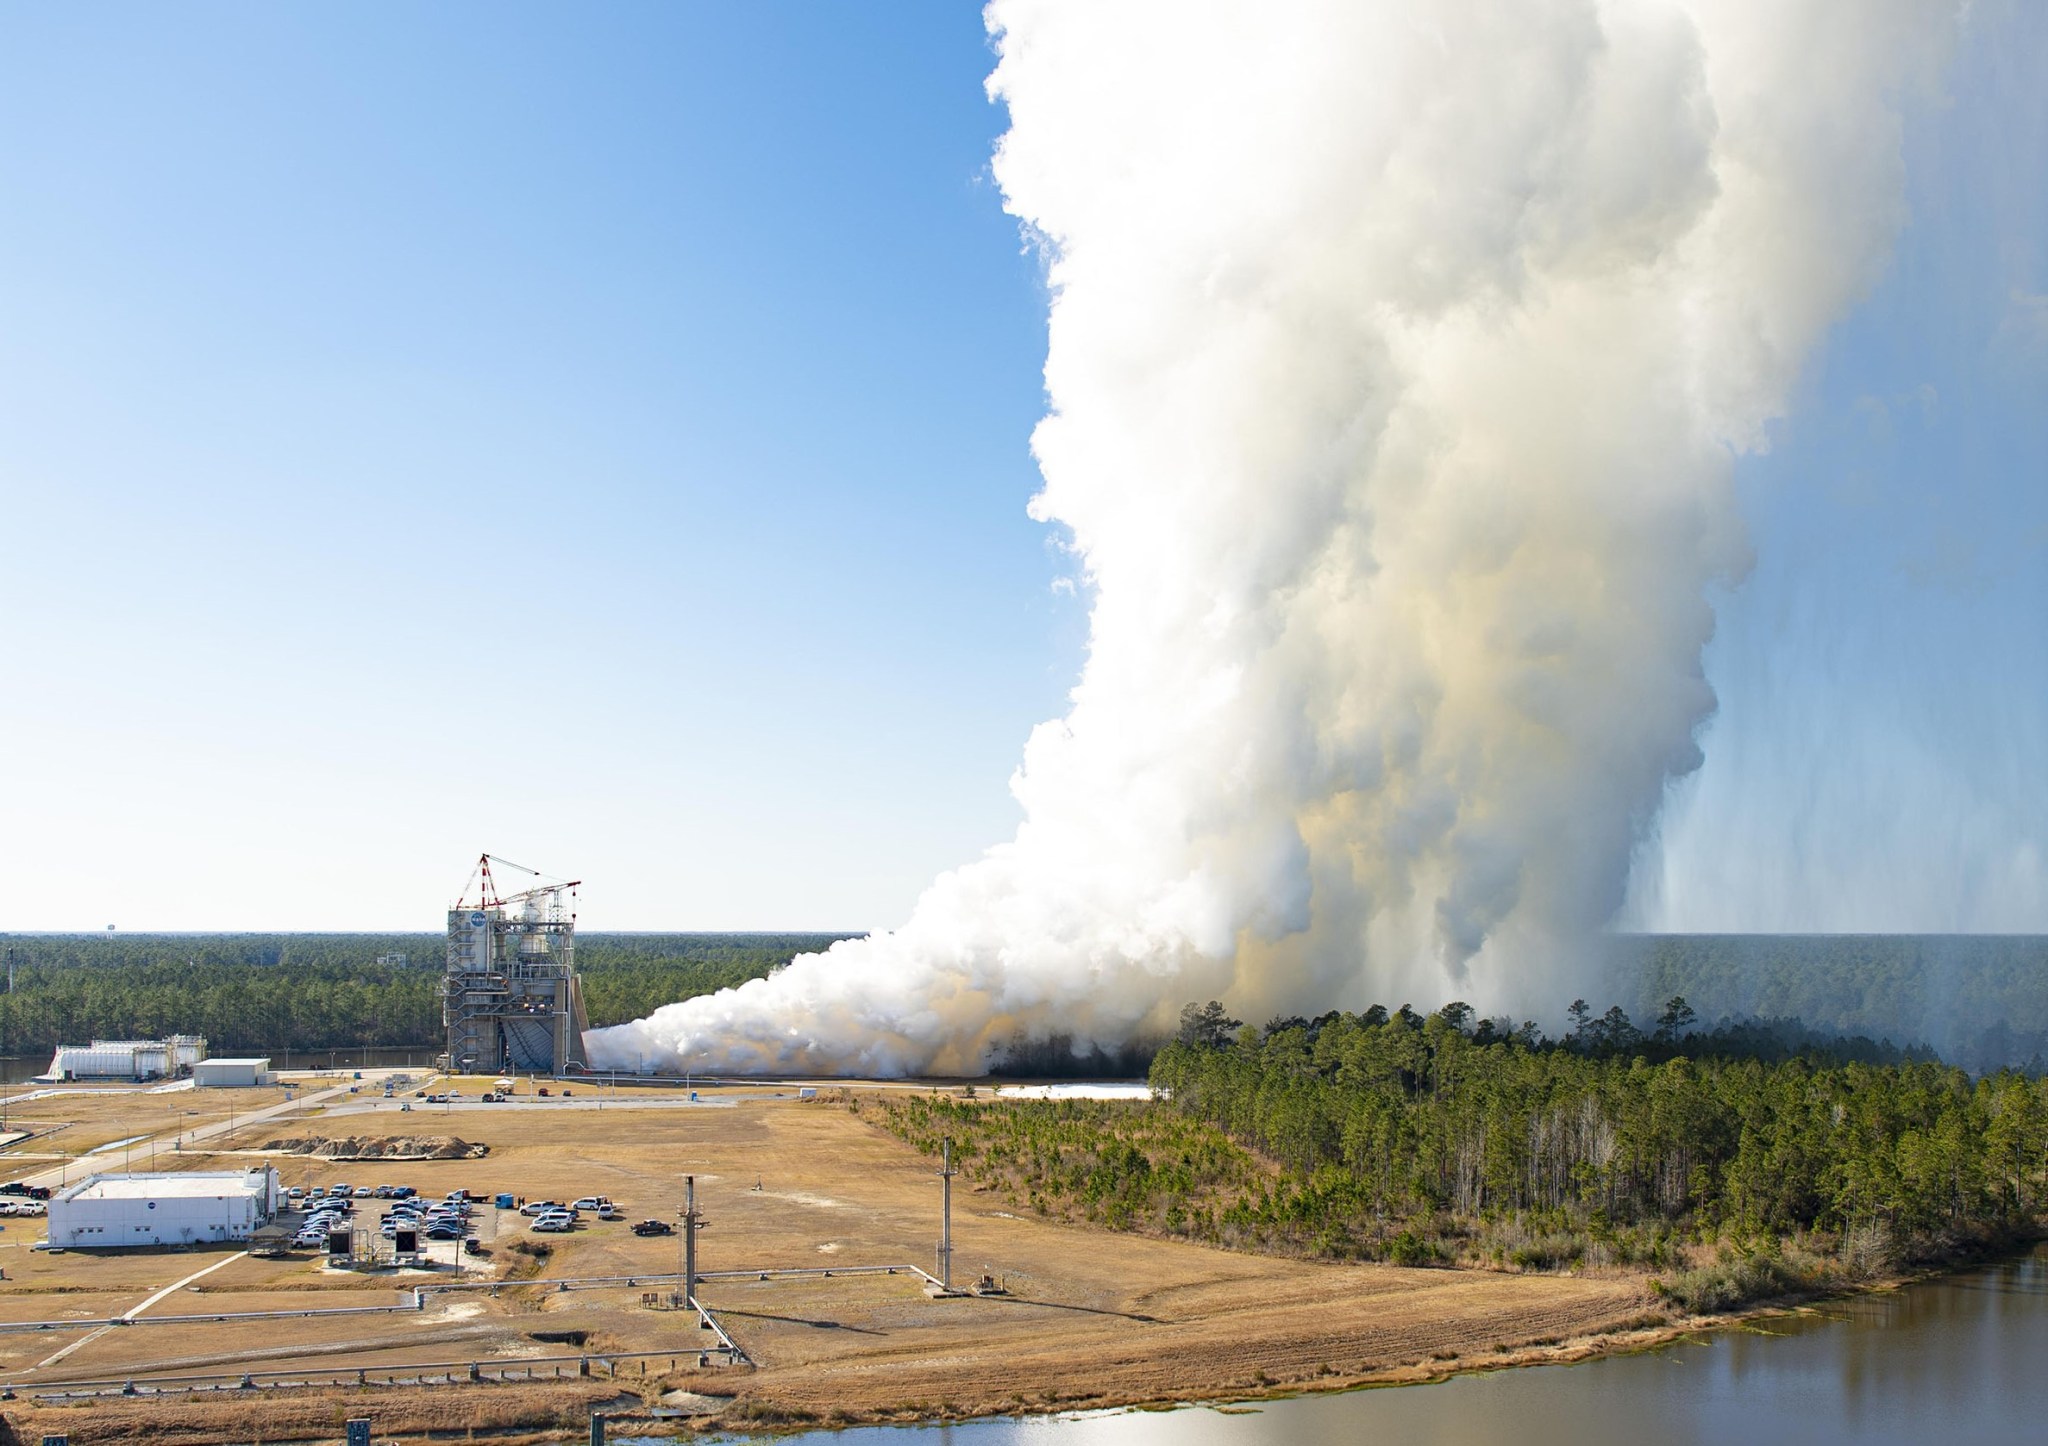 NASA conducts an RS-25 engine hot fire test Feb. 8 on the Fred Haise Test Stand at Stennis. 